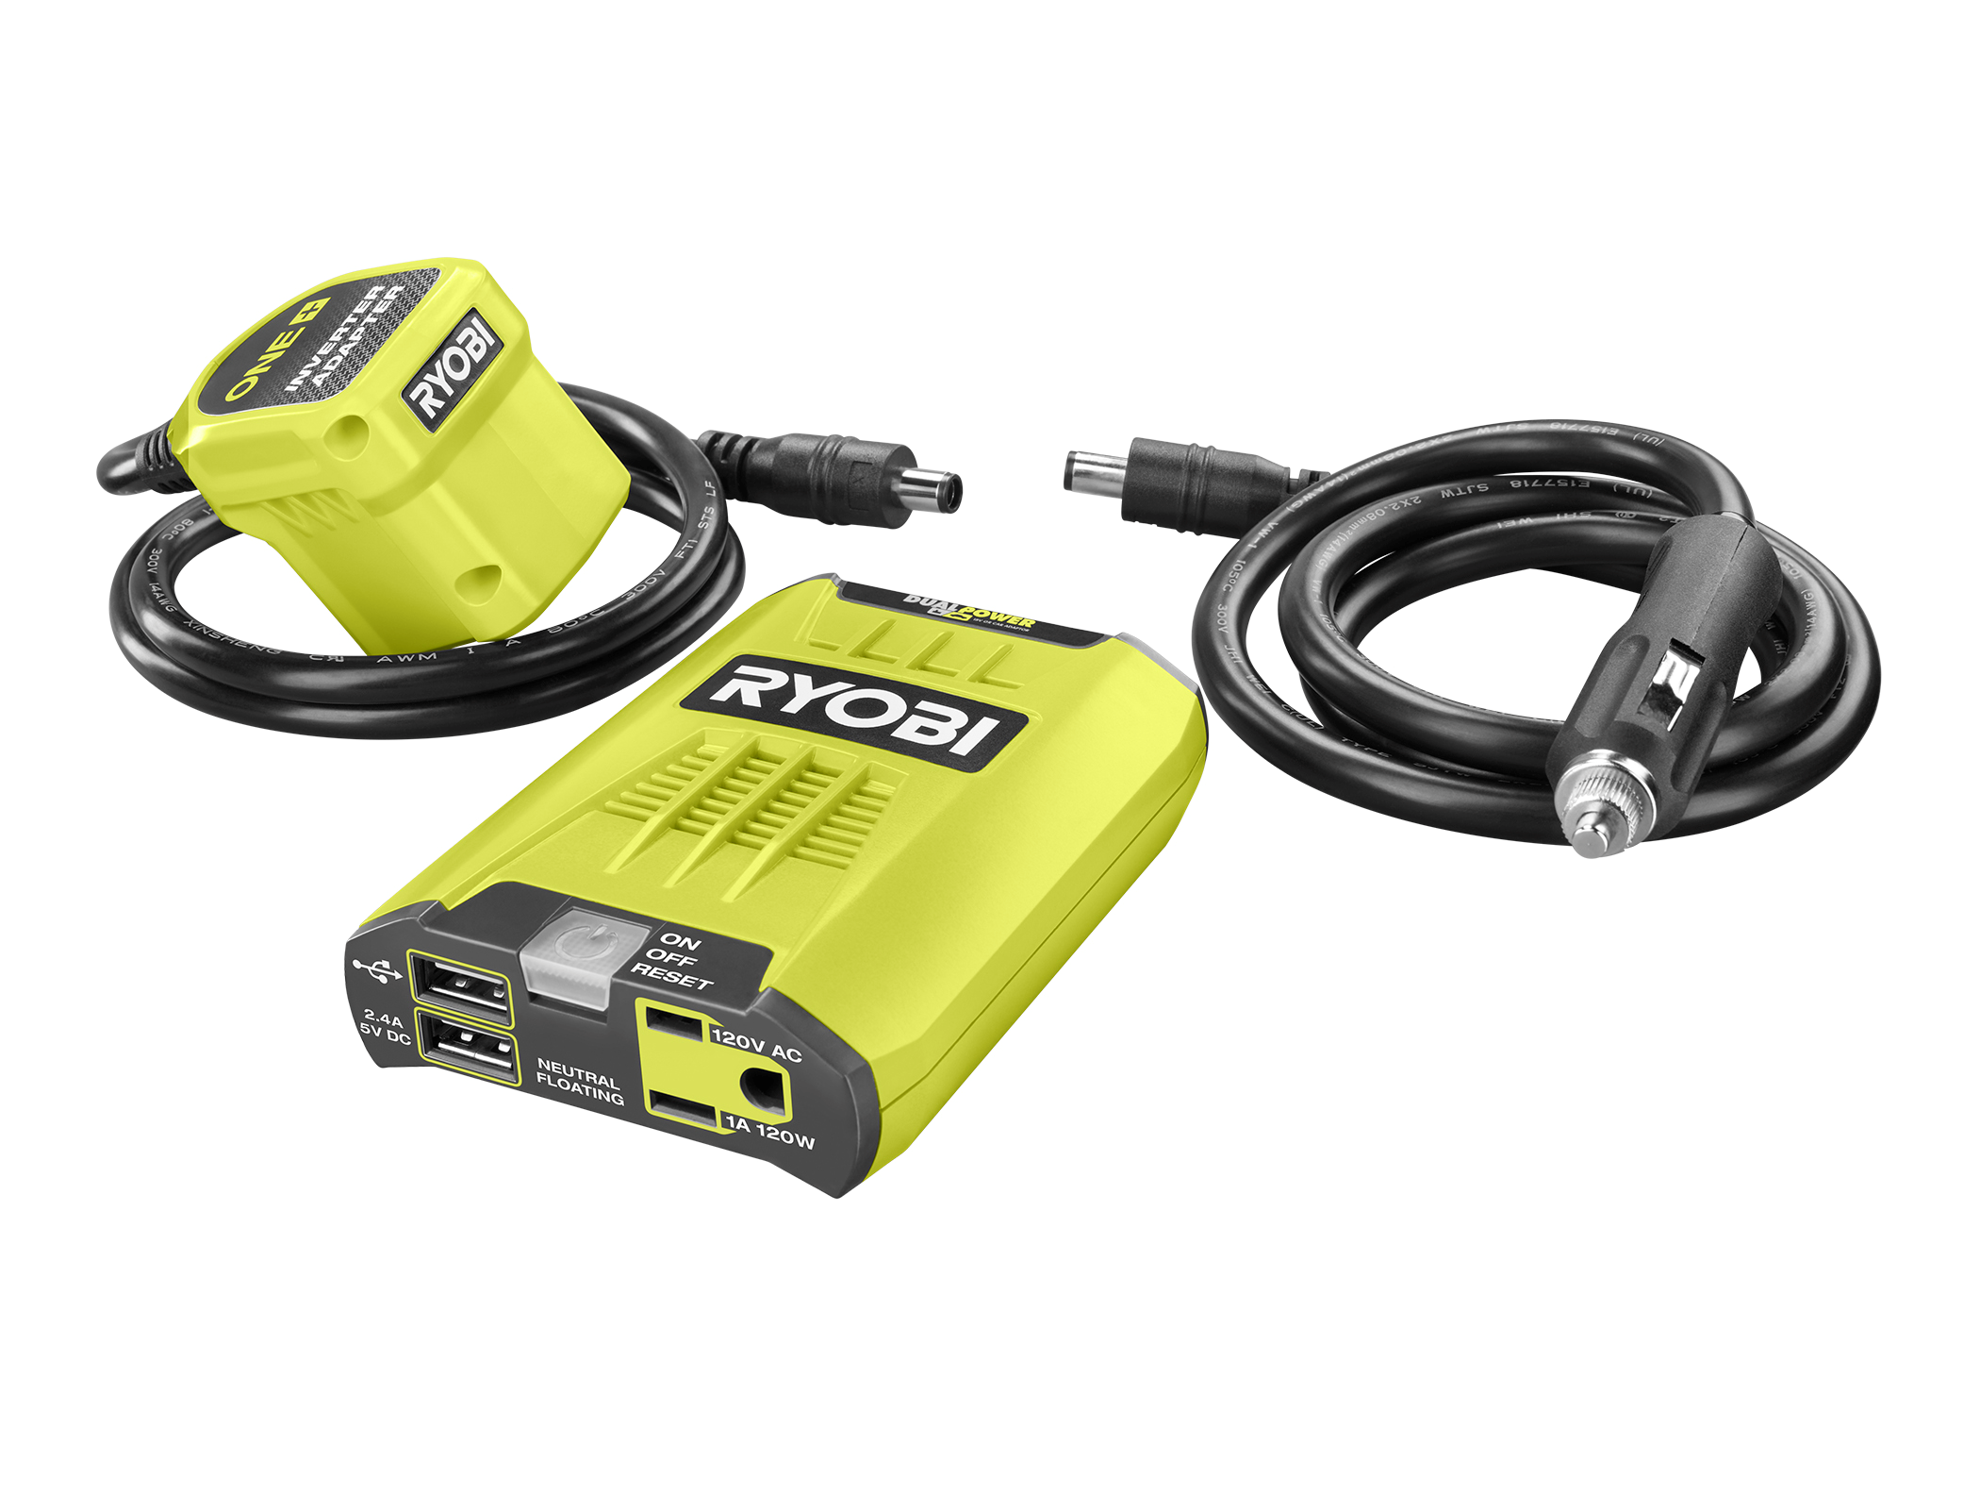 Photo: Includes Both 18V and 12V Power Adaptor Cables